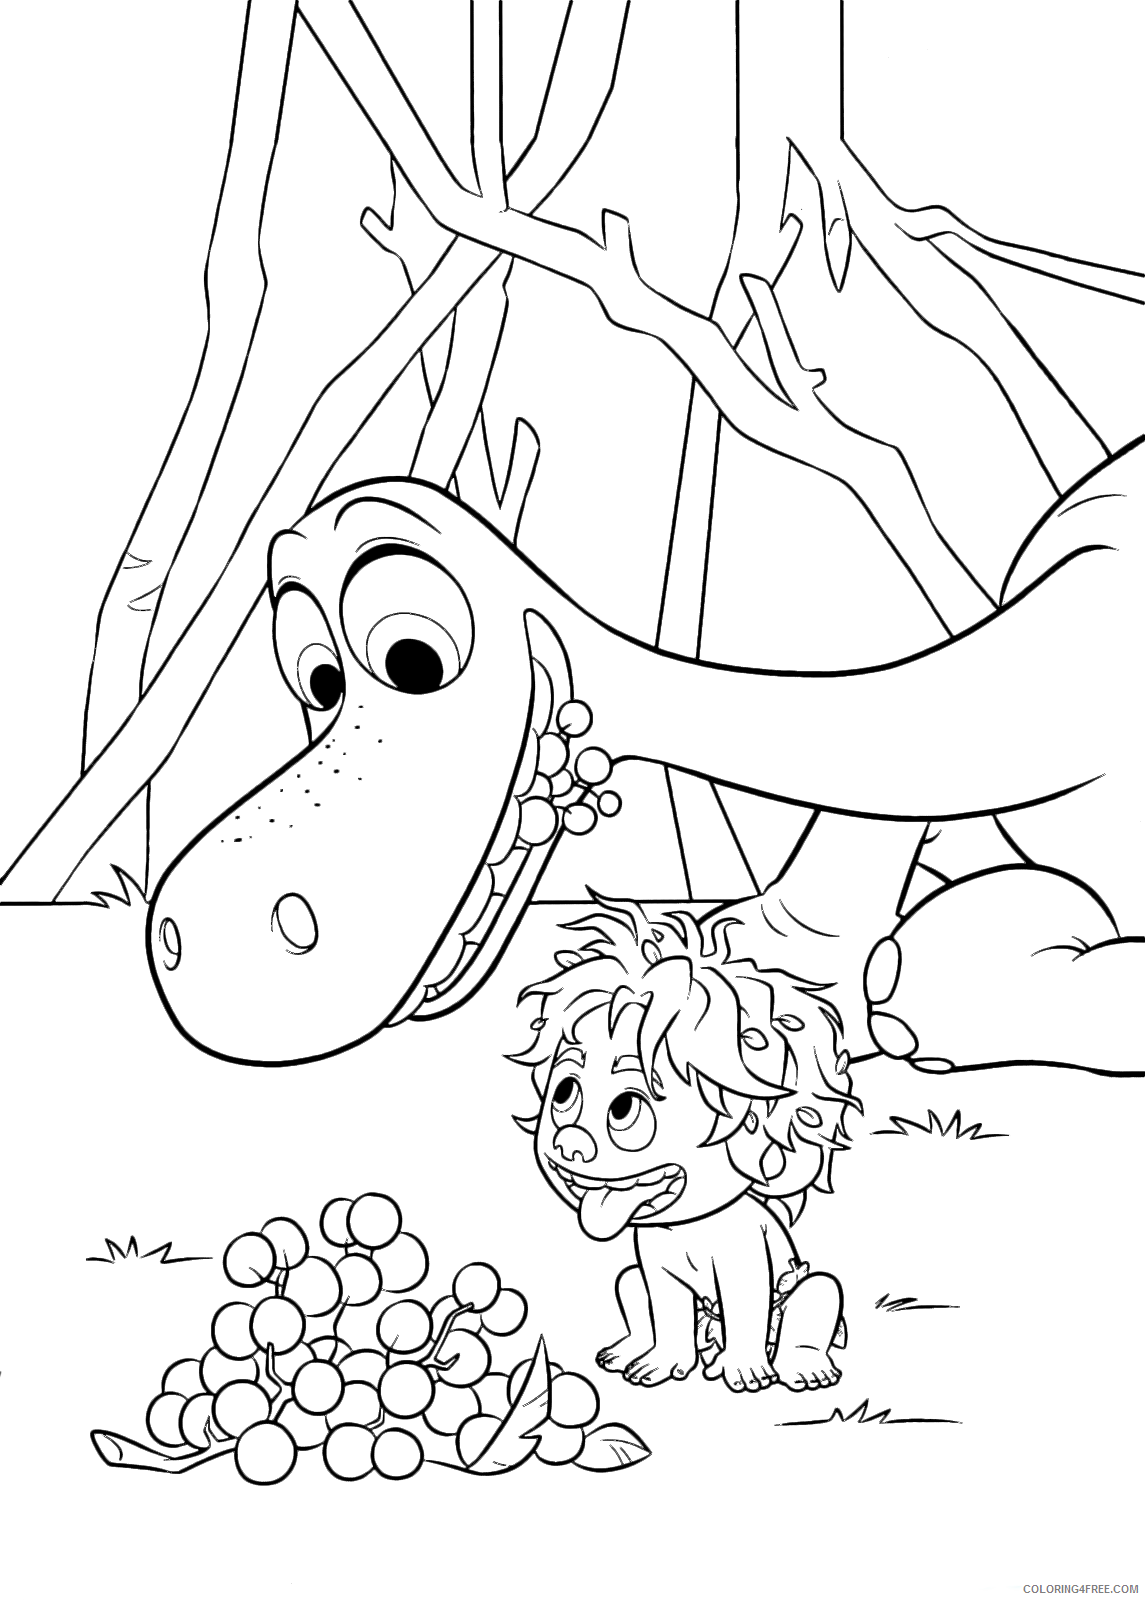 The Good Dinosaur Coloring Pages TV Film Spot and Arlo Eat Berries 2020 08820 Coloring4free